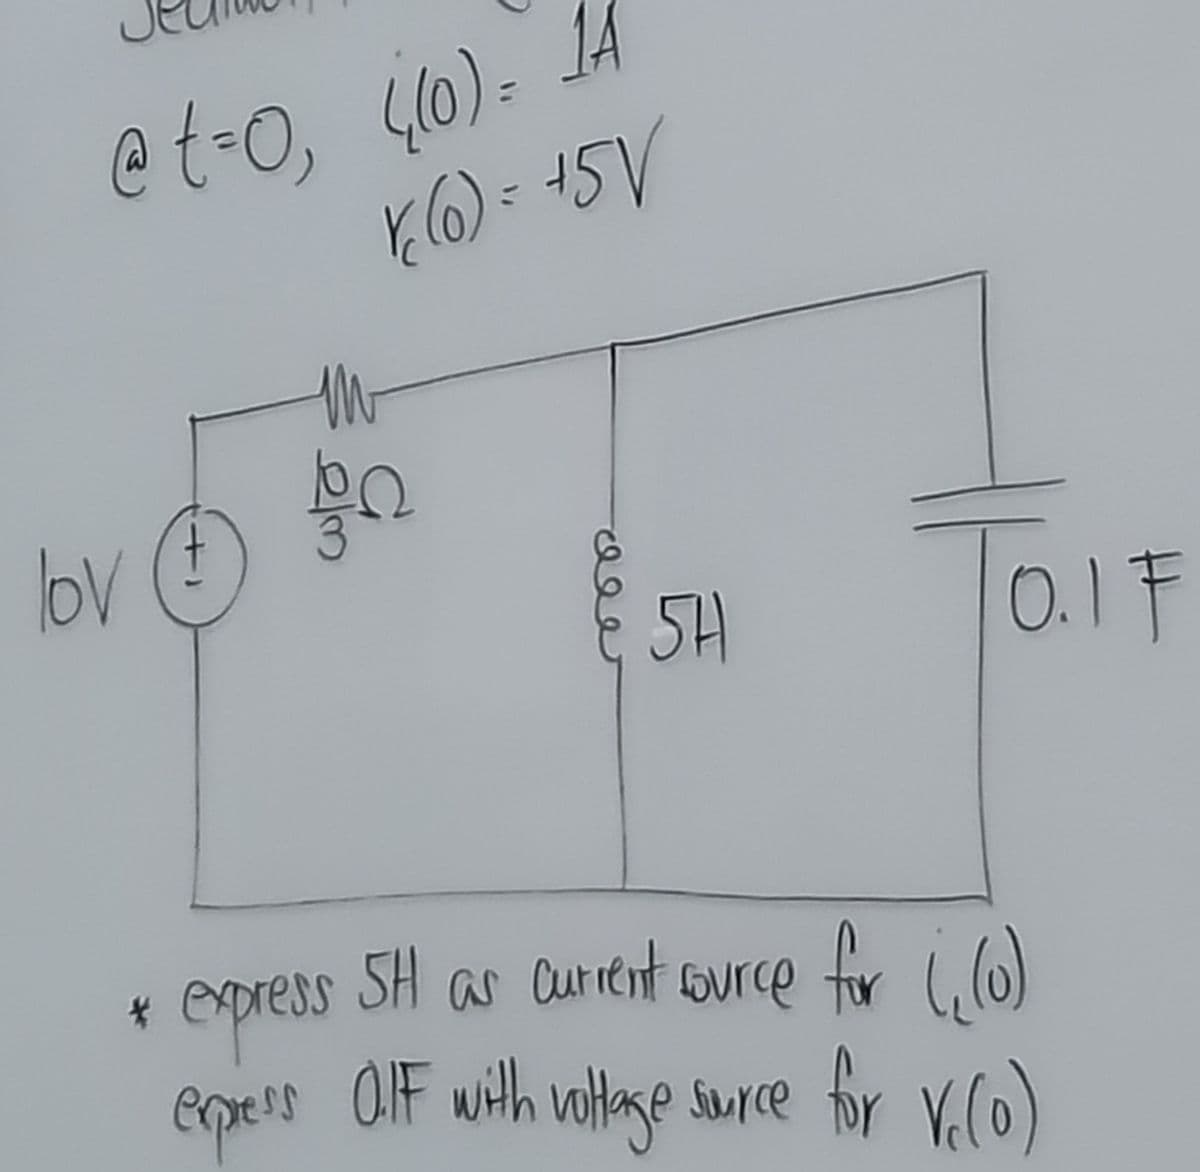 @ t=0, ((0) = 14
K(0) = +5V
lov
'+
elm
5H
0.1 F
* express SH as current source for (((0)
express O.IF with voltage source for V.(0)